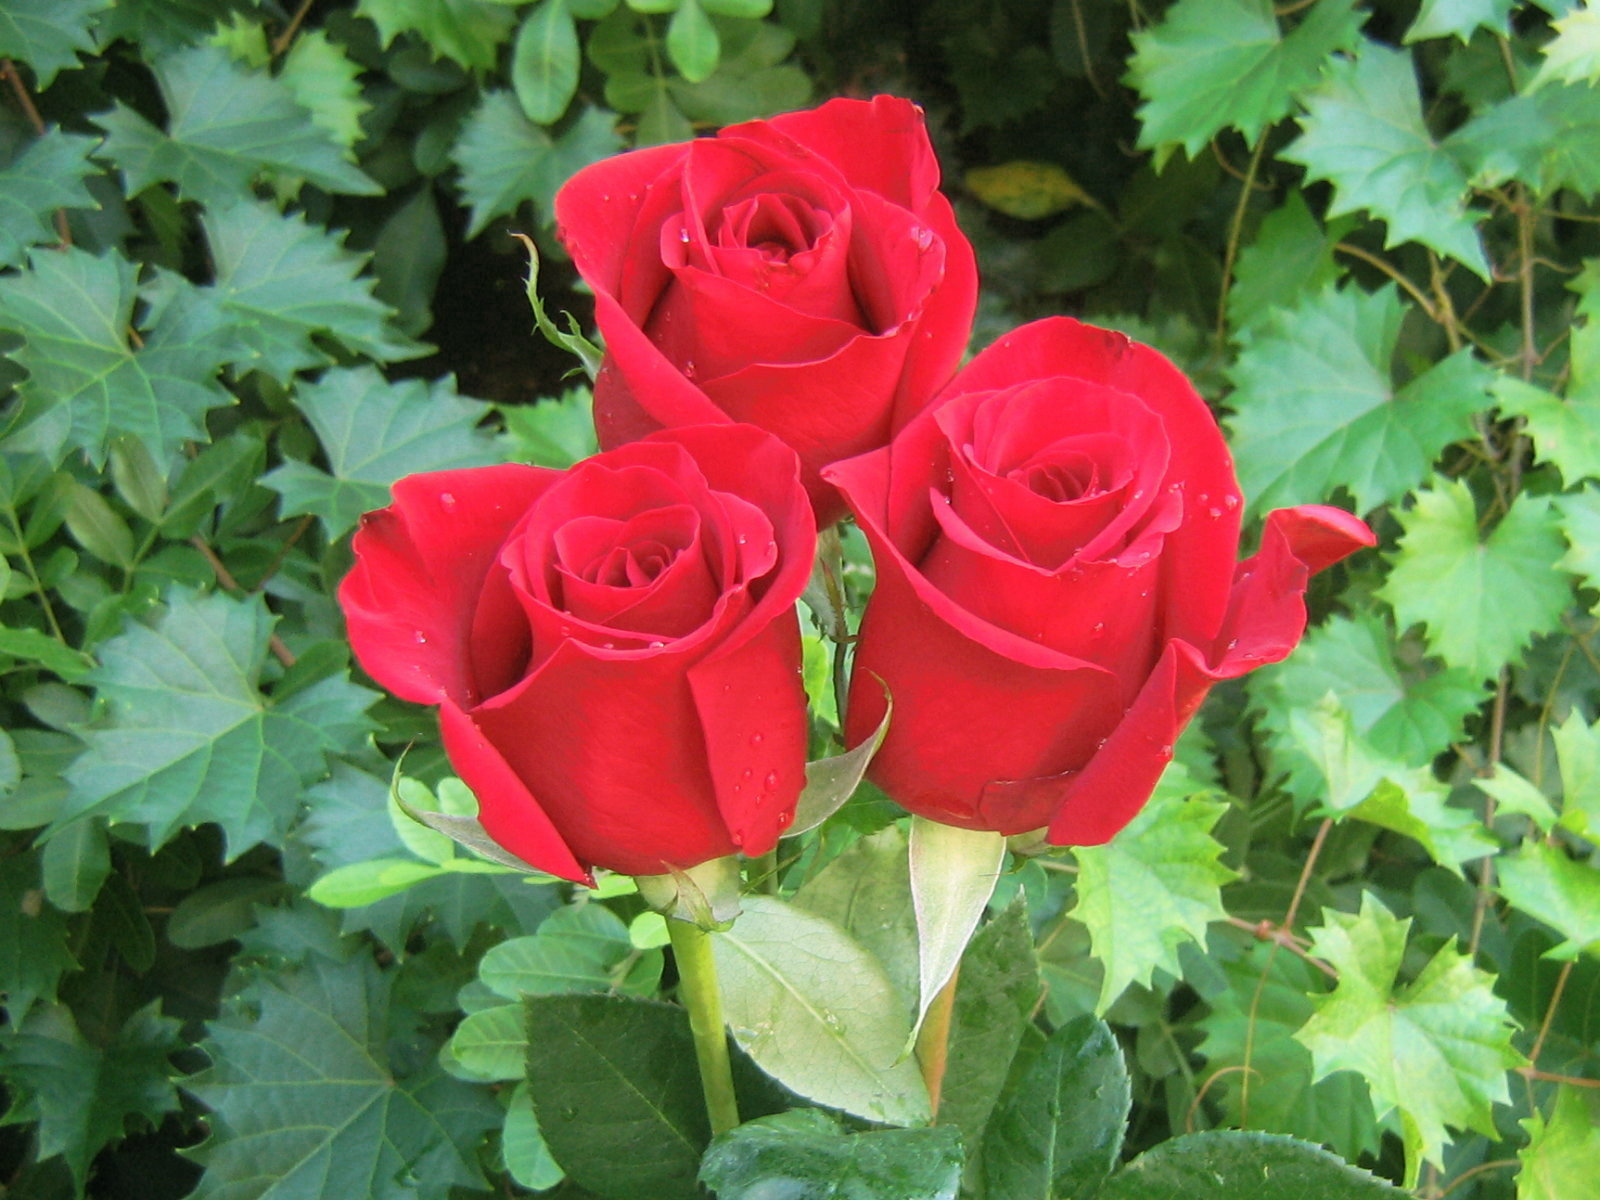 Pictures World Beautiful Red Rose Wallpaper